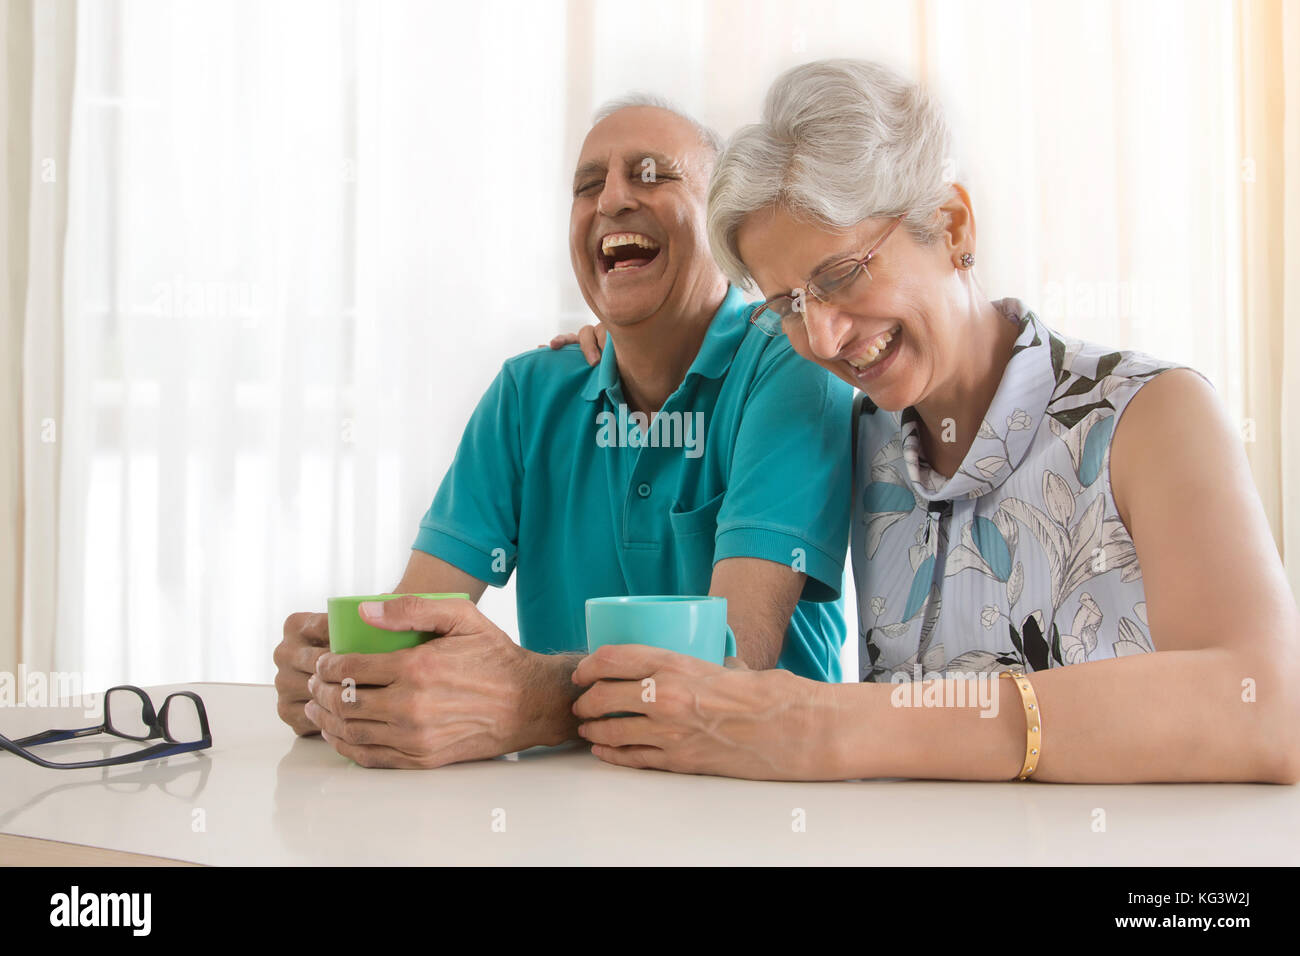 Senior couple laughing while drinking coffee at table Stock Photo